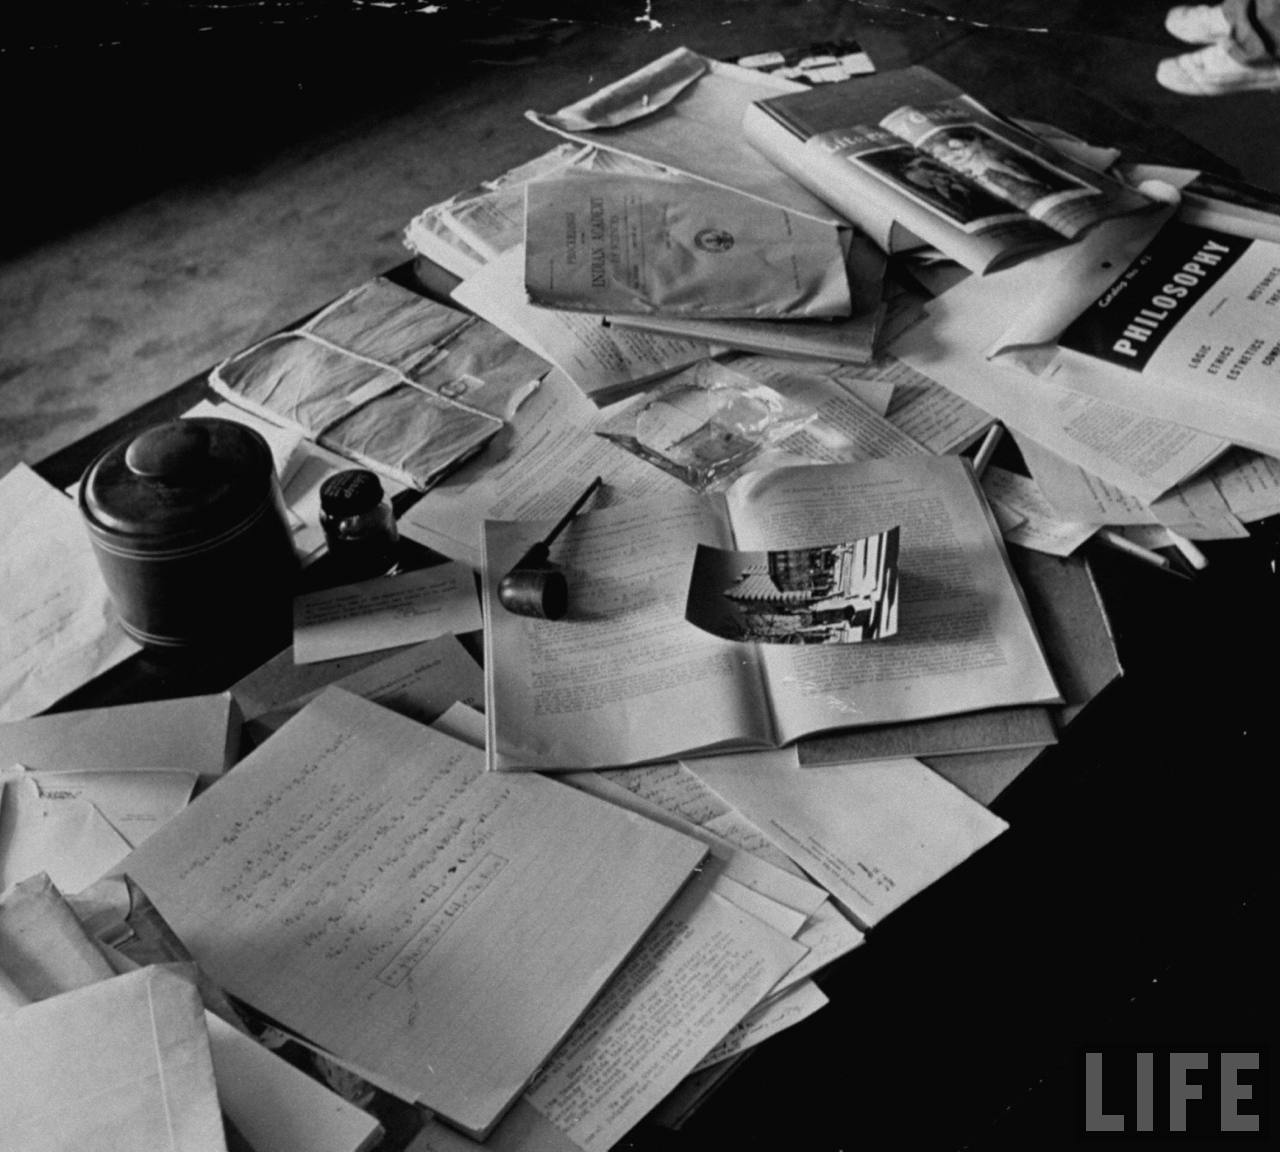 EINSTEIN'S+DESK+PHOTOGRAPHED+A+DAY+AFTER+HIS+DEATH.jpg